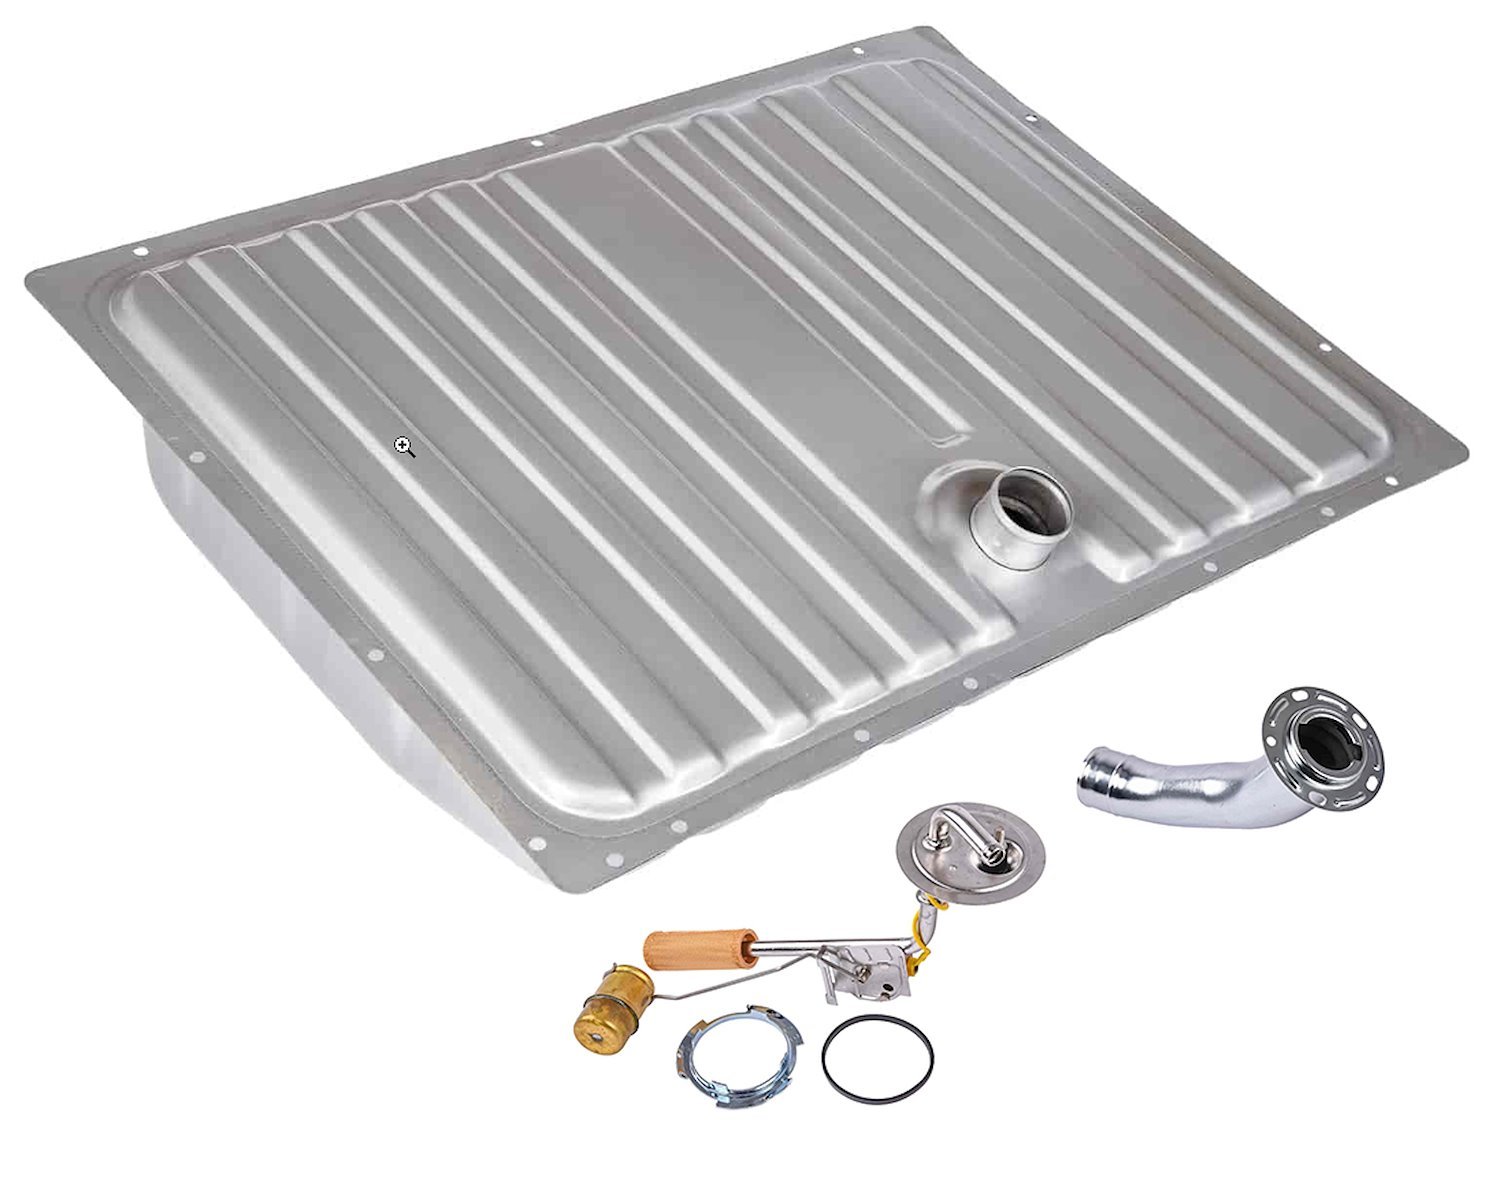 Fuel Tank Kit for 1964-1966 Ford Mustang [16-Gallon]